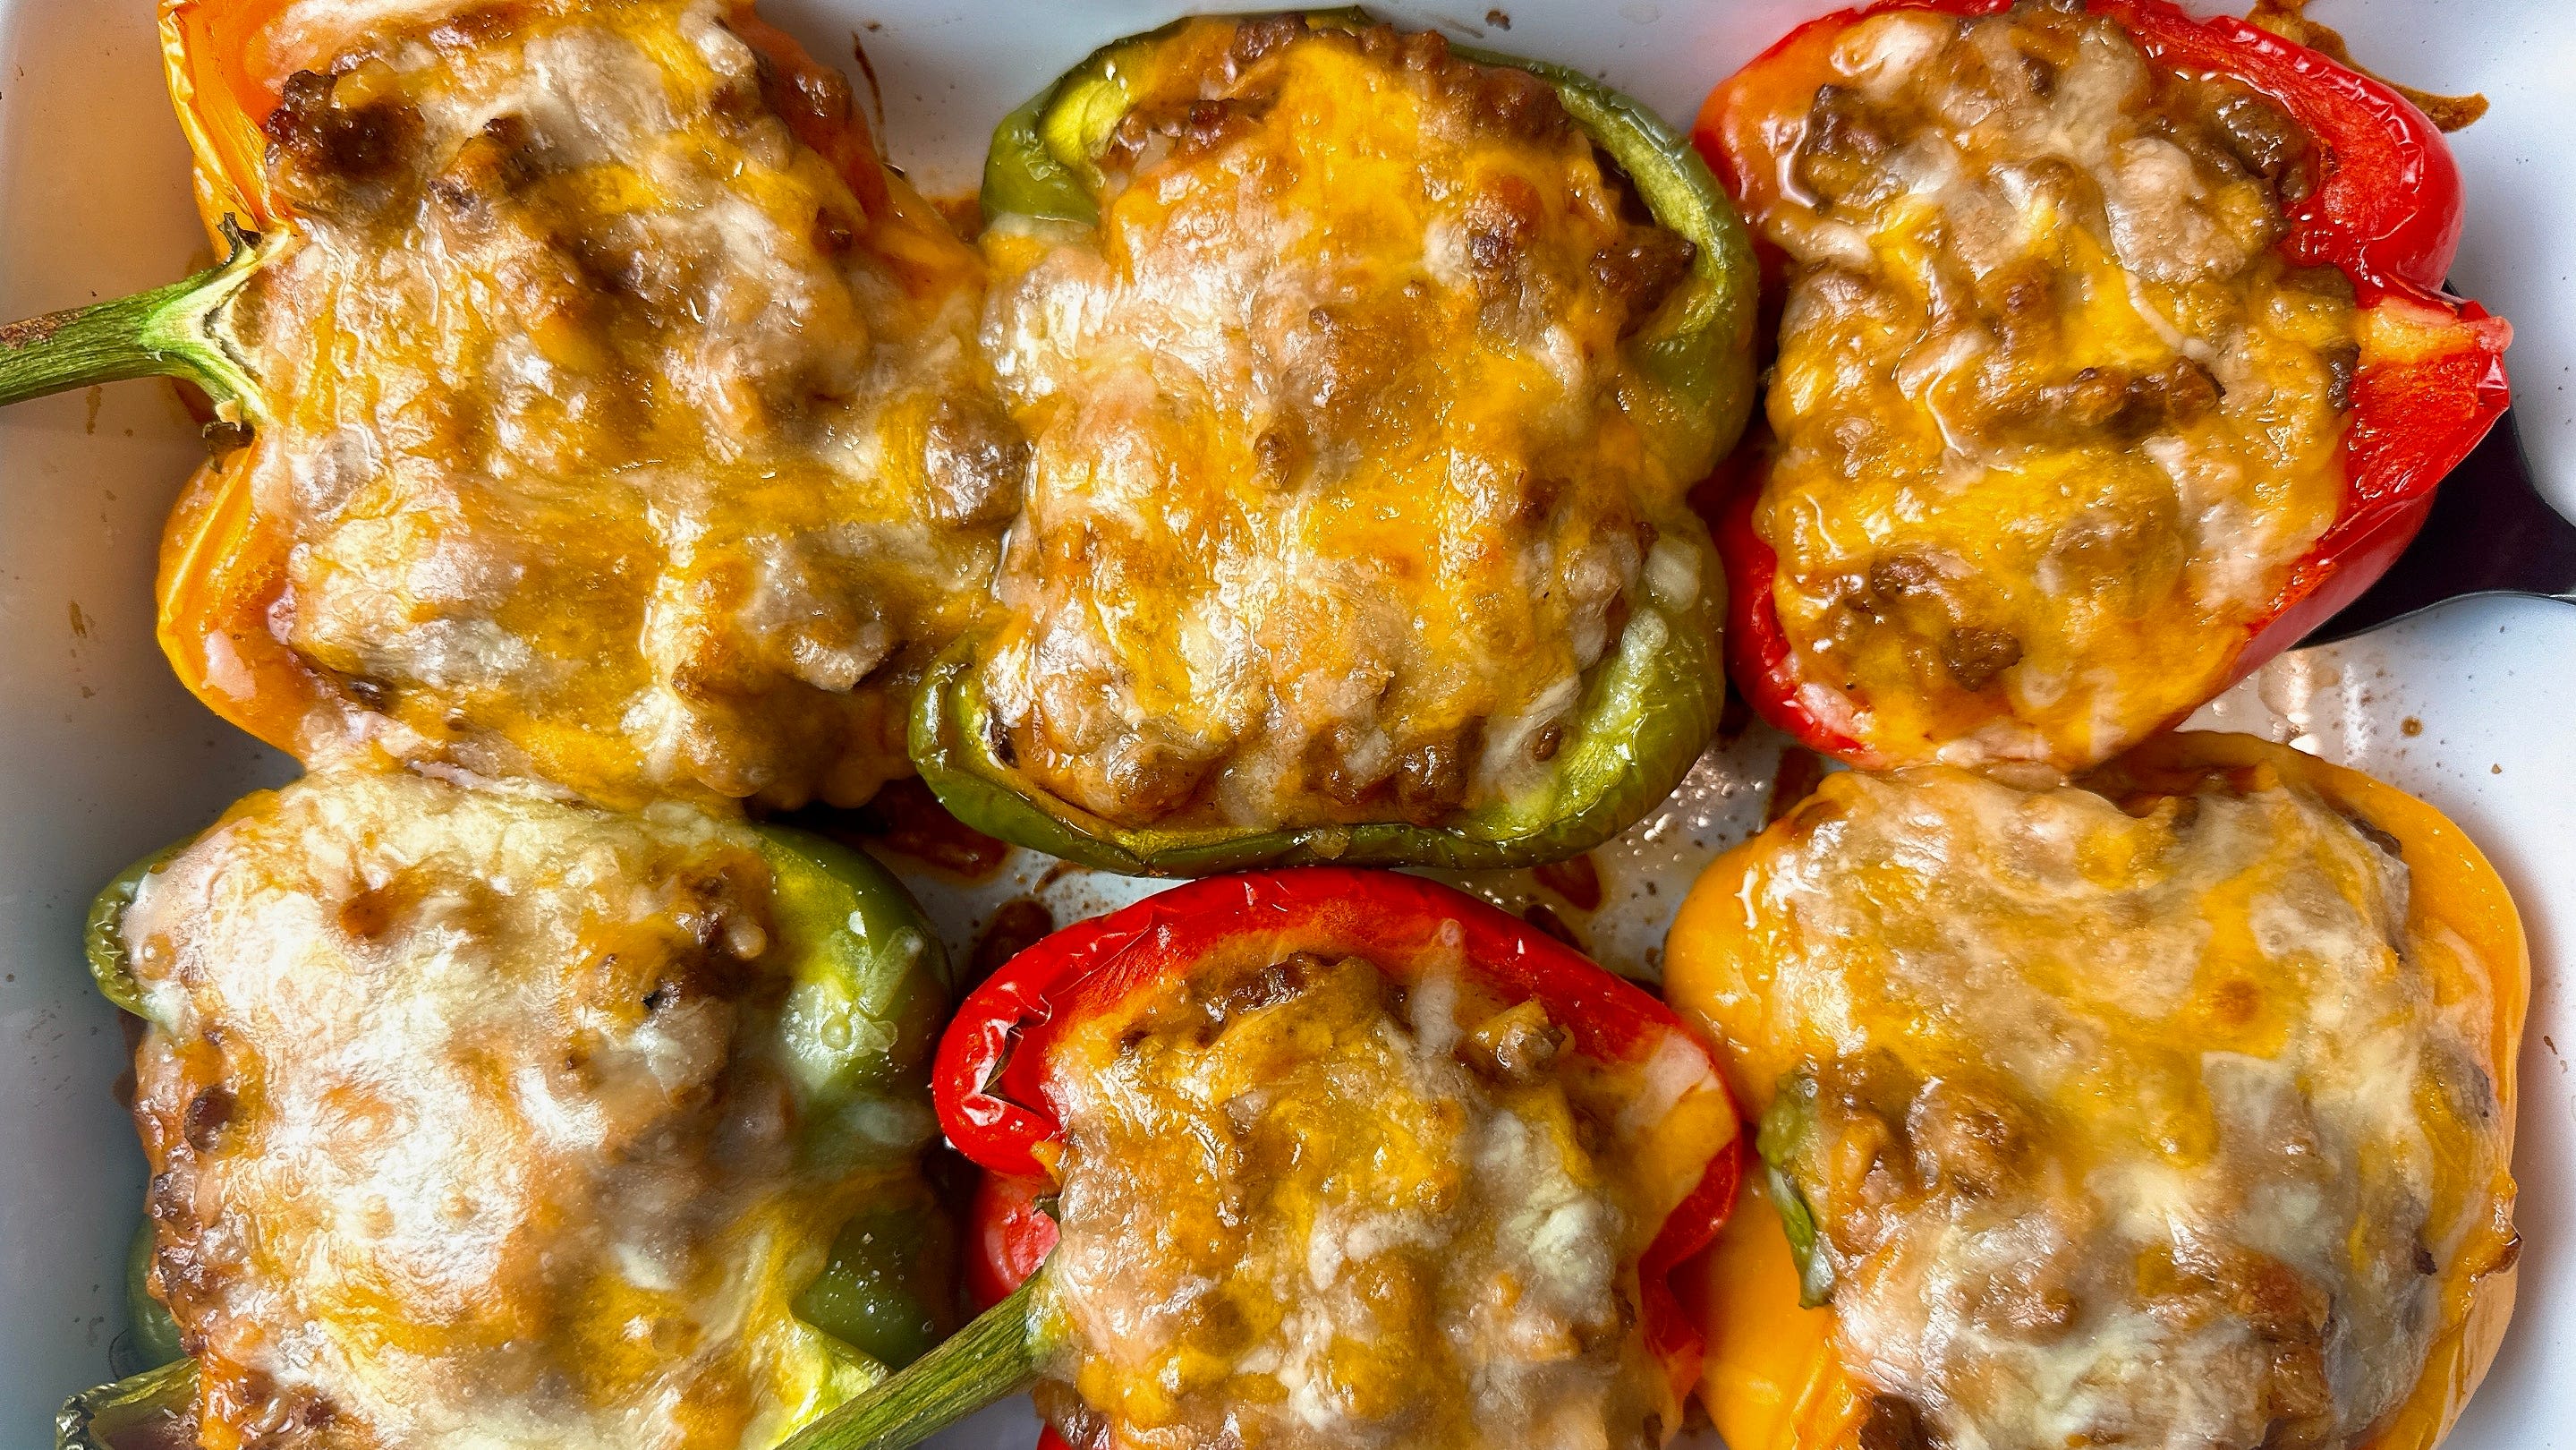 Stuffed peppers are easy to make ahead and total crowd-pleasers. Here's how to make them